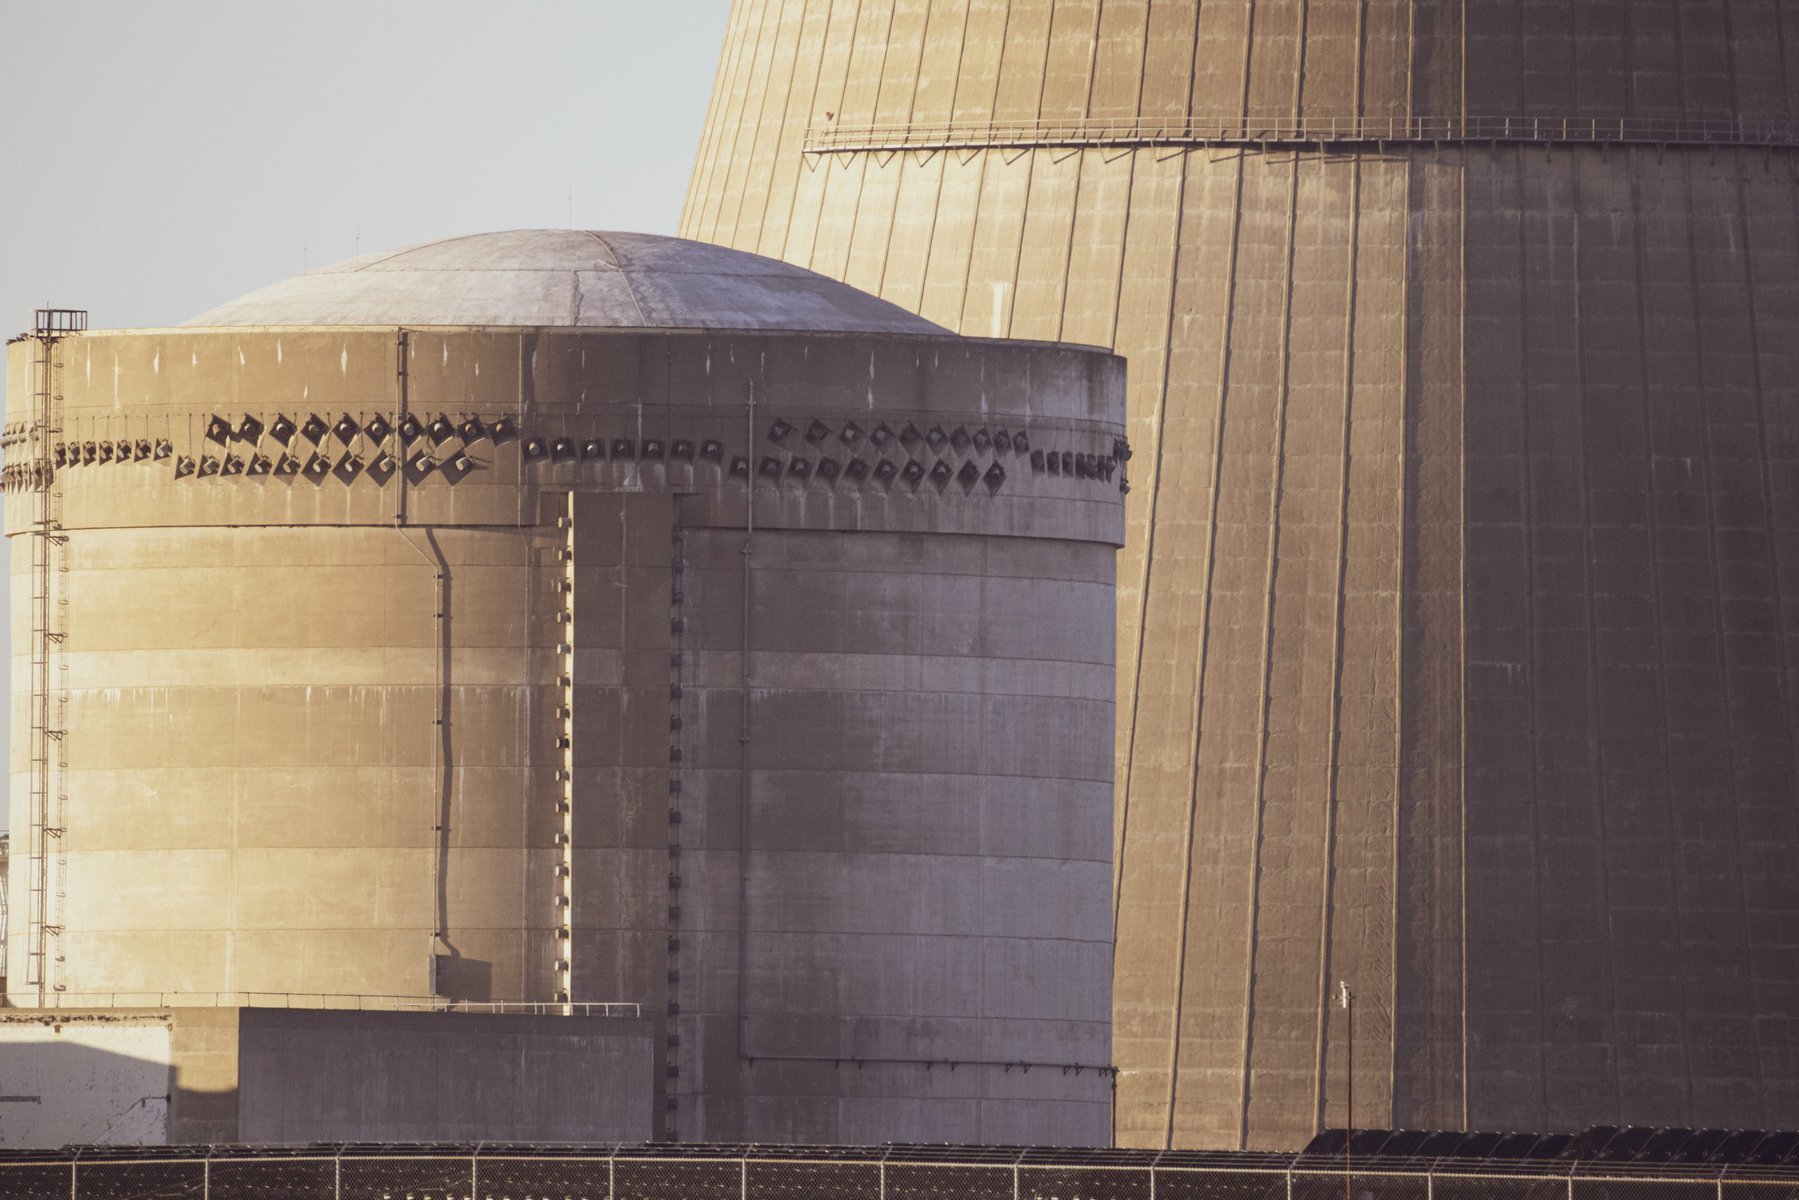 Nuclear plant in lingen germany